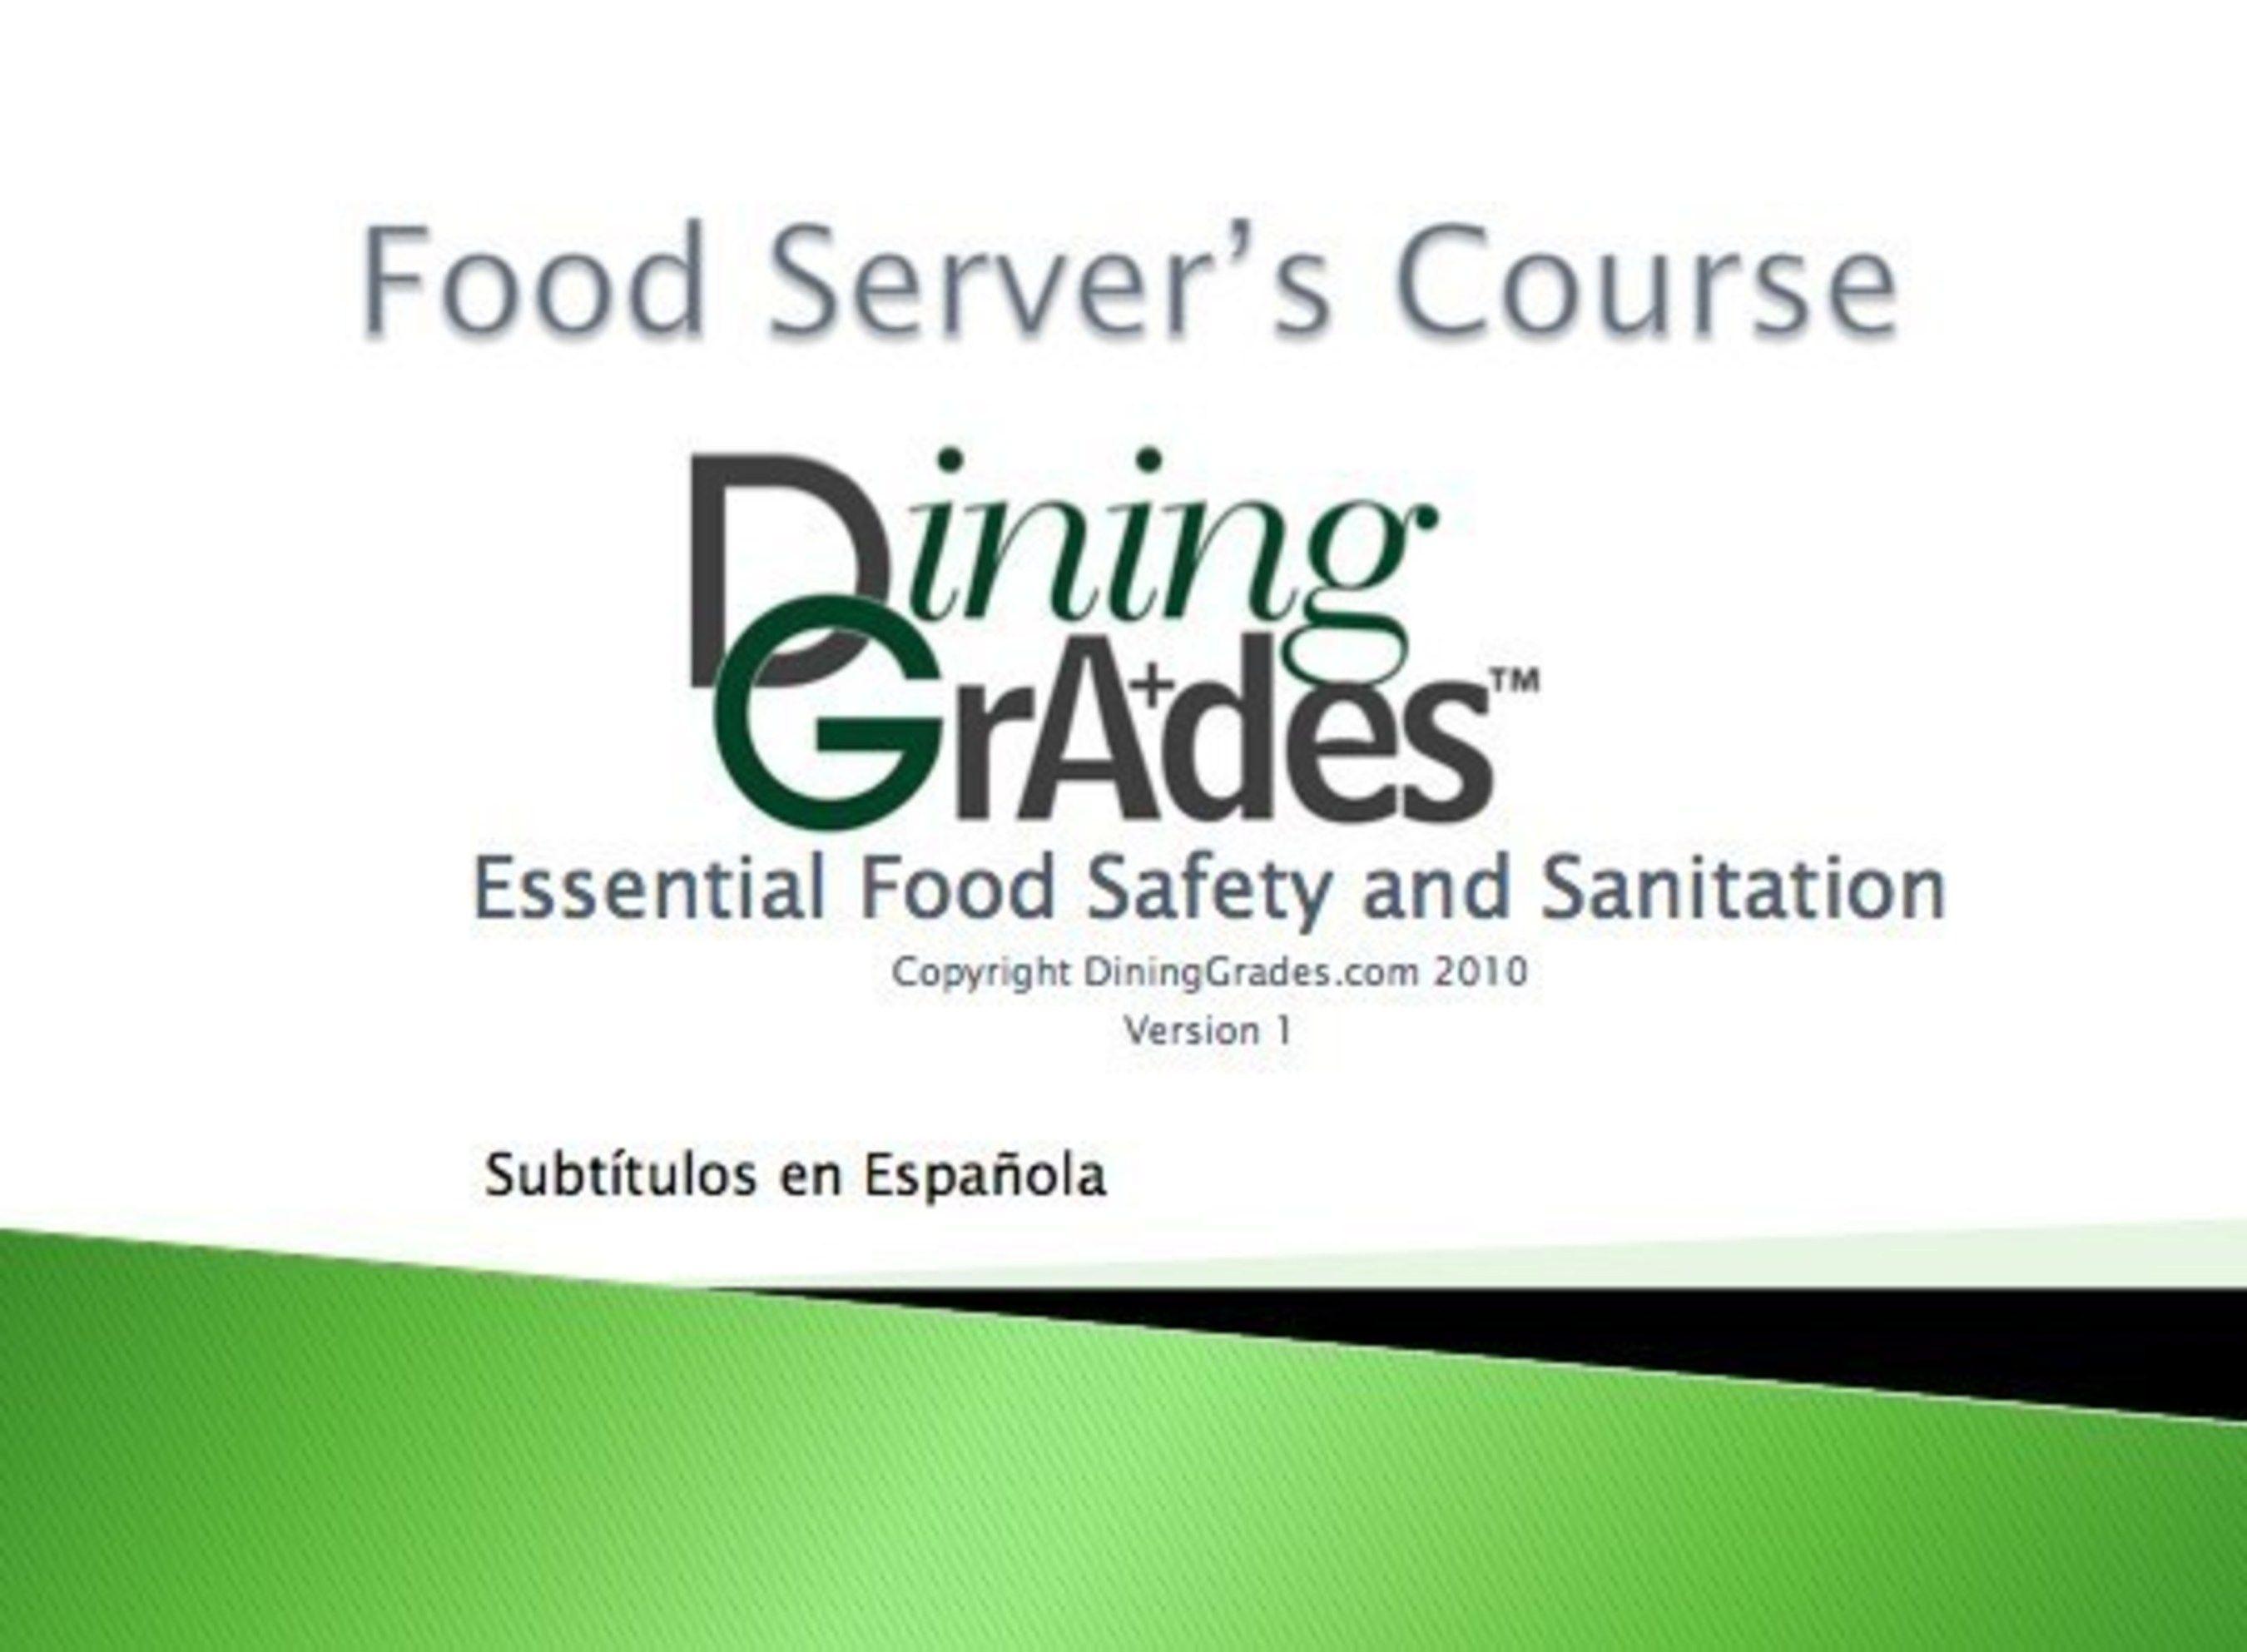 Food Server Logo - DiningGrades Offers Free Food Safety Courses to Reduce Dirty Dining